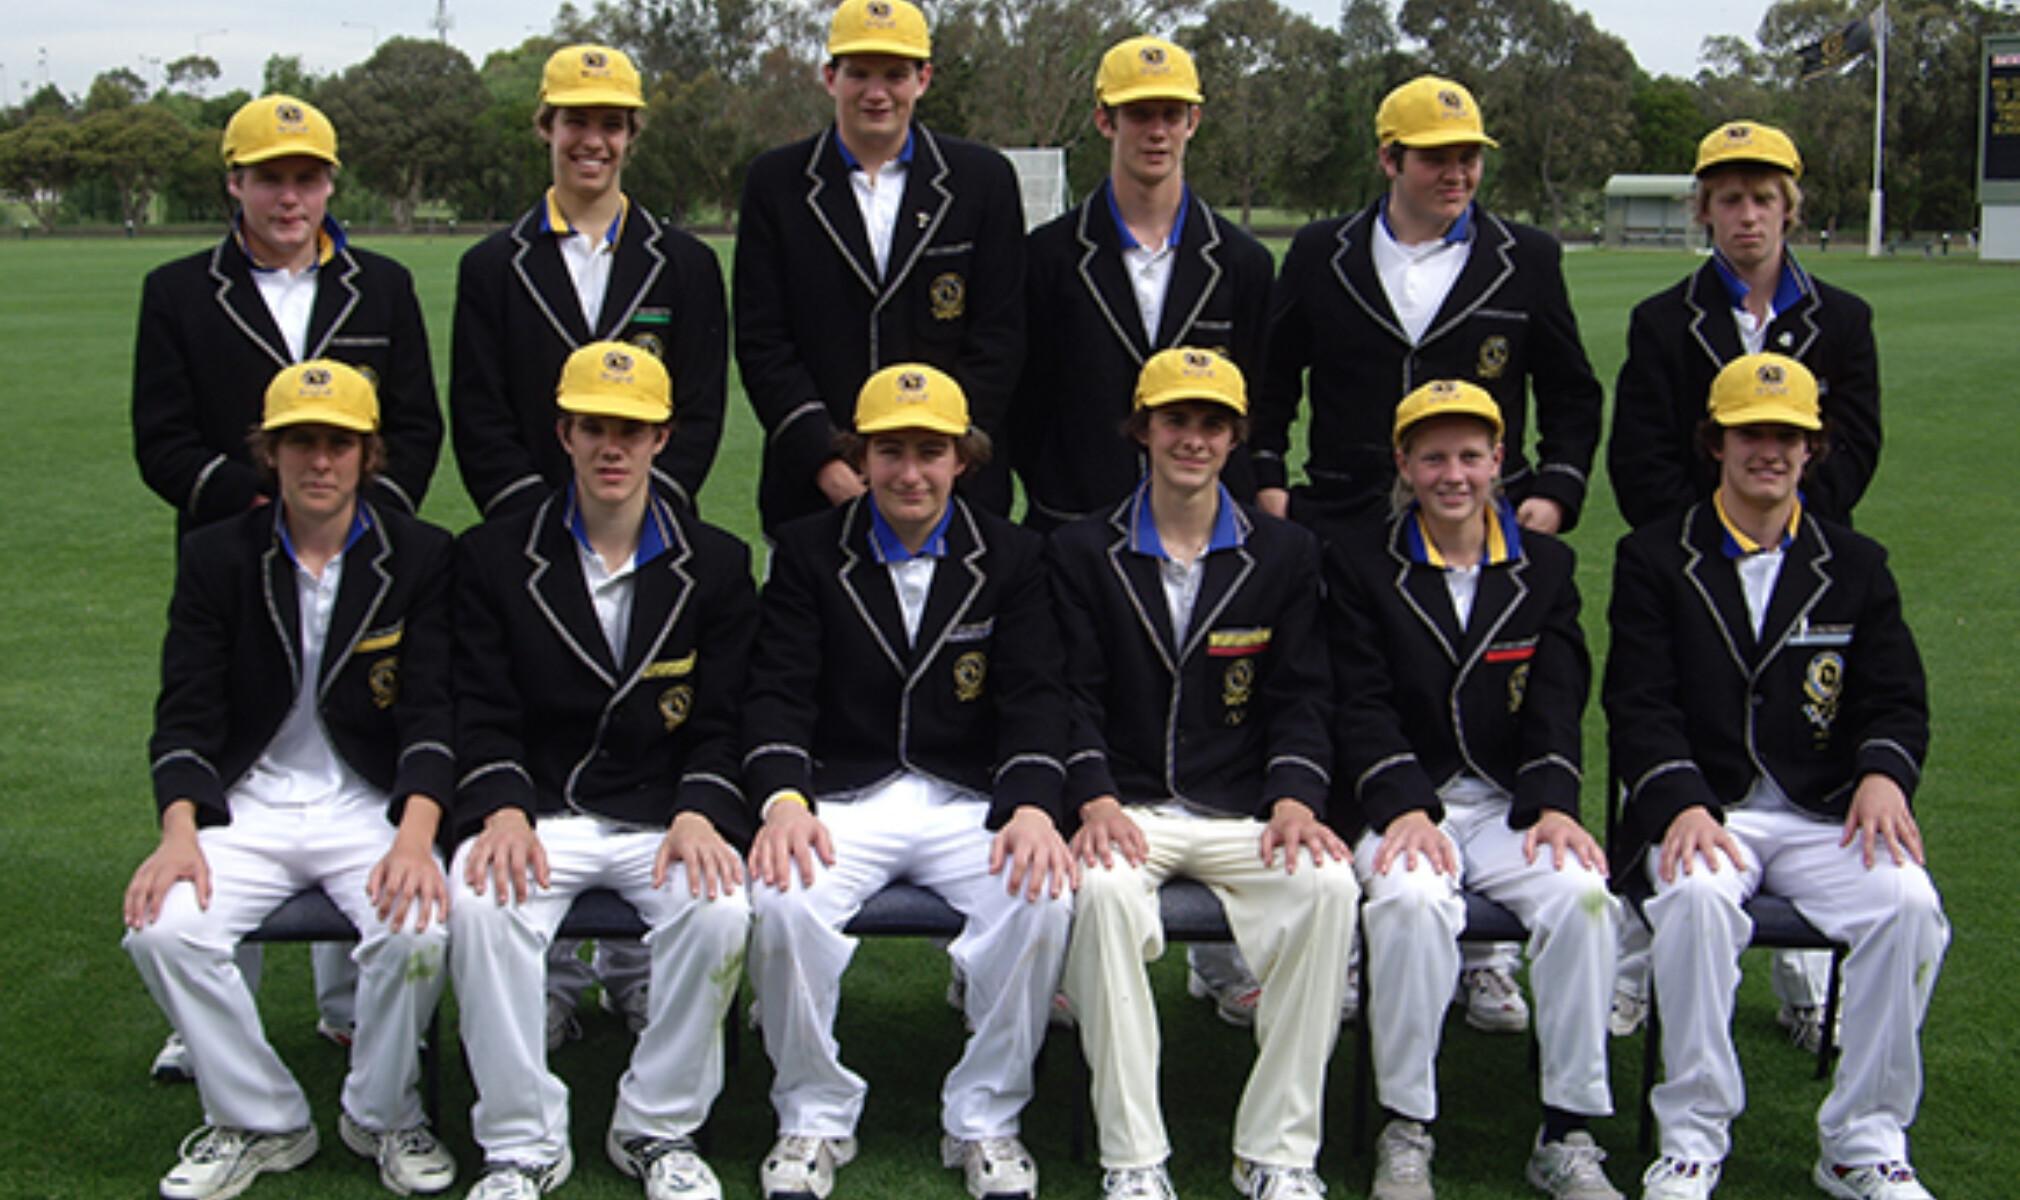 The 2006 First XI Cricket Team including Mag Lanning (front row, second from right).